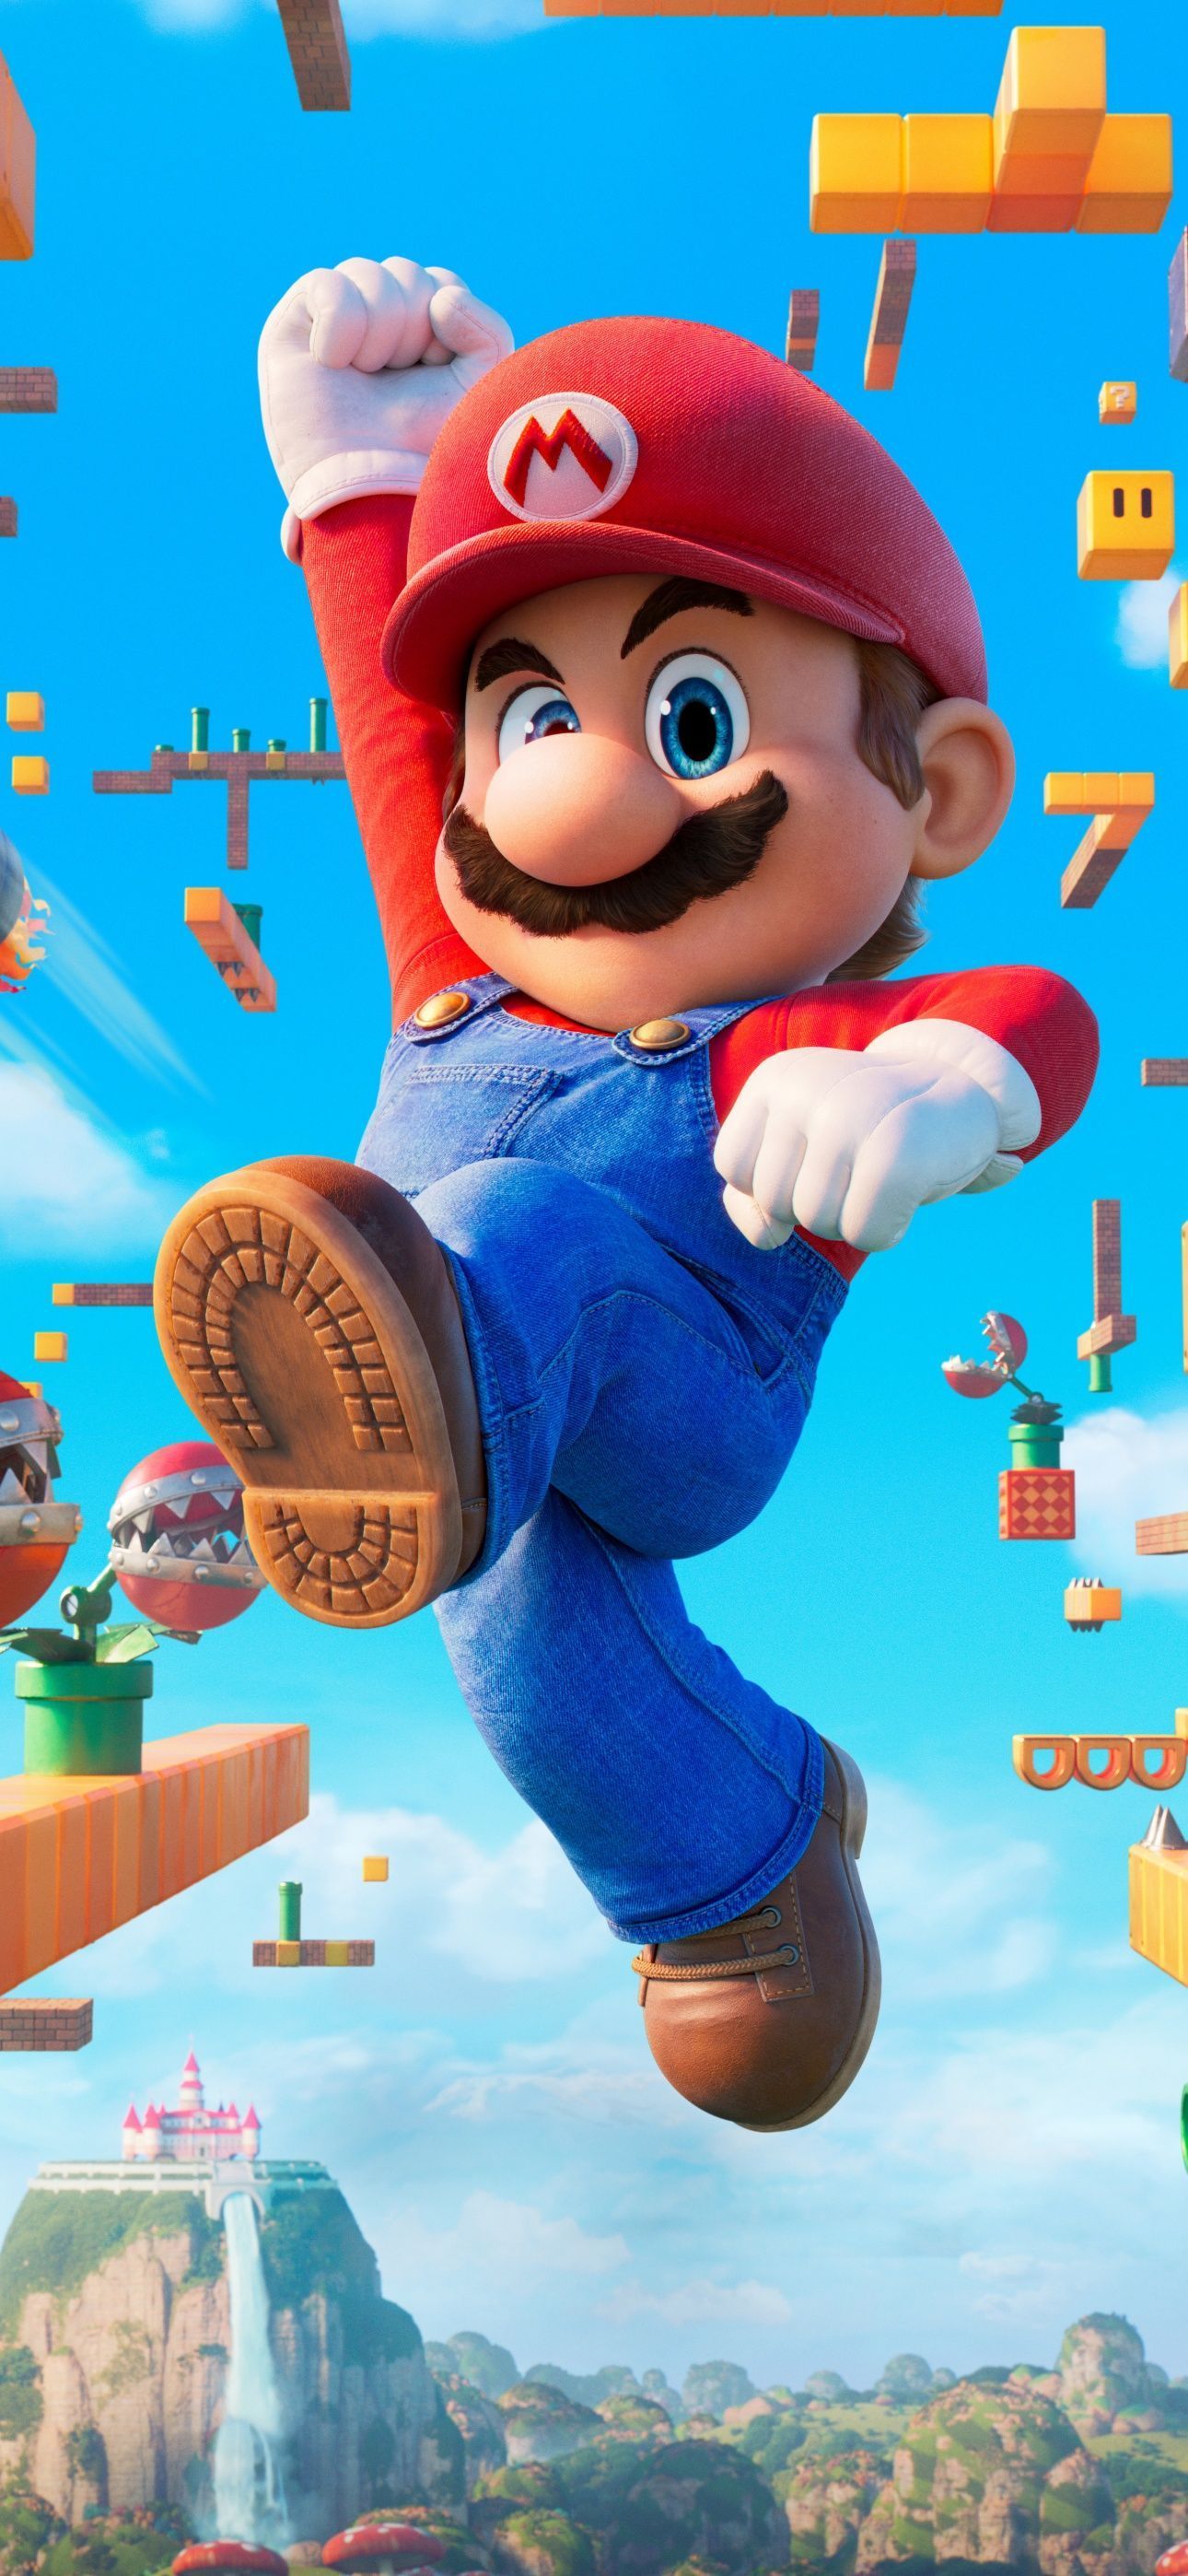 Mario in the air with blocks and a waterfall in the background - Super Mario